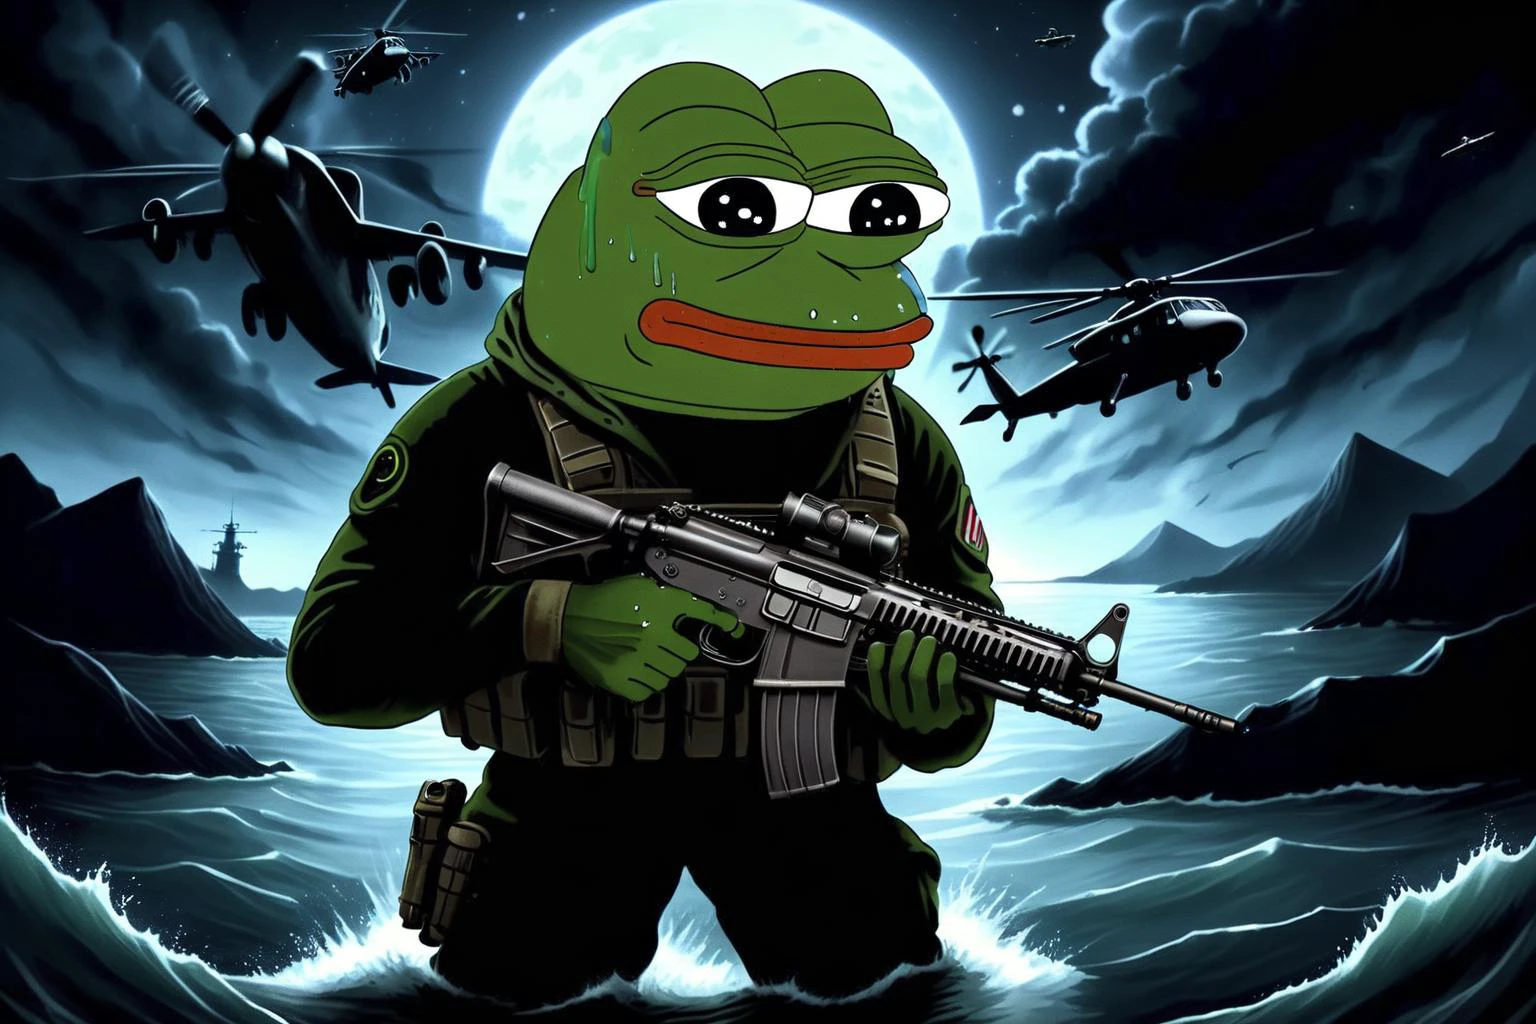 A tactical Navy Seal (Pepe the Frog:1.2) emerging from water in the middle of the night,equipped with night vision goggles and armed,with a dark,stealthy background,capturing the essence of a covert military operation. The scene is wide,showcasing the vastness of the night sea and sky,enhancing the atmosphere of secrecy and danger.,pepe_frog,pepe